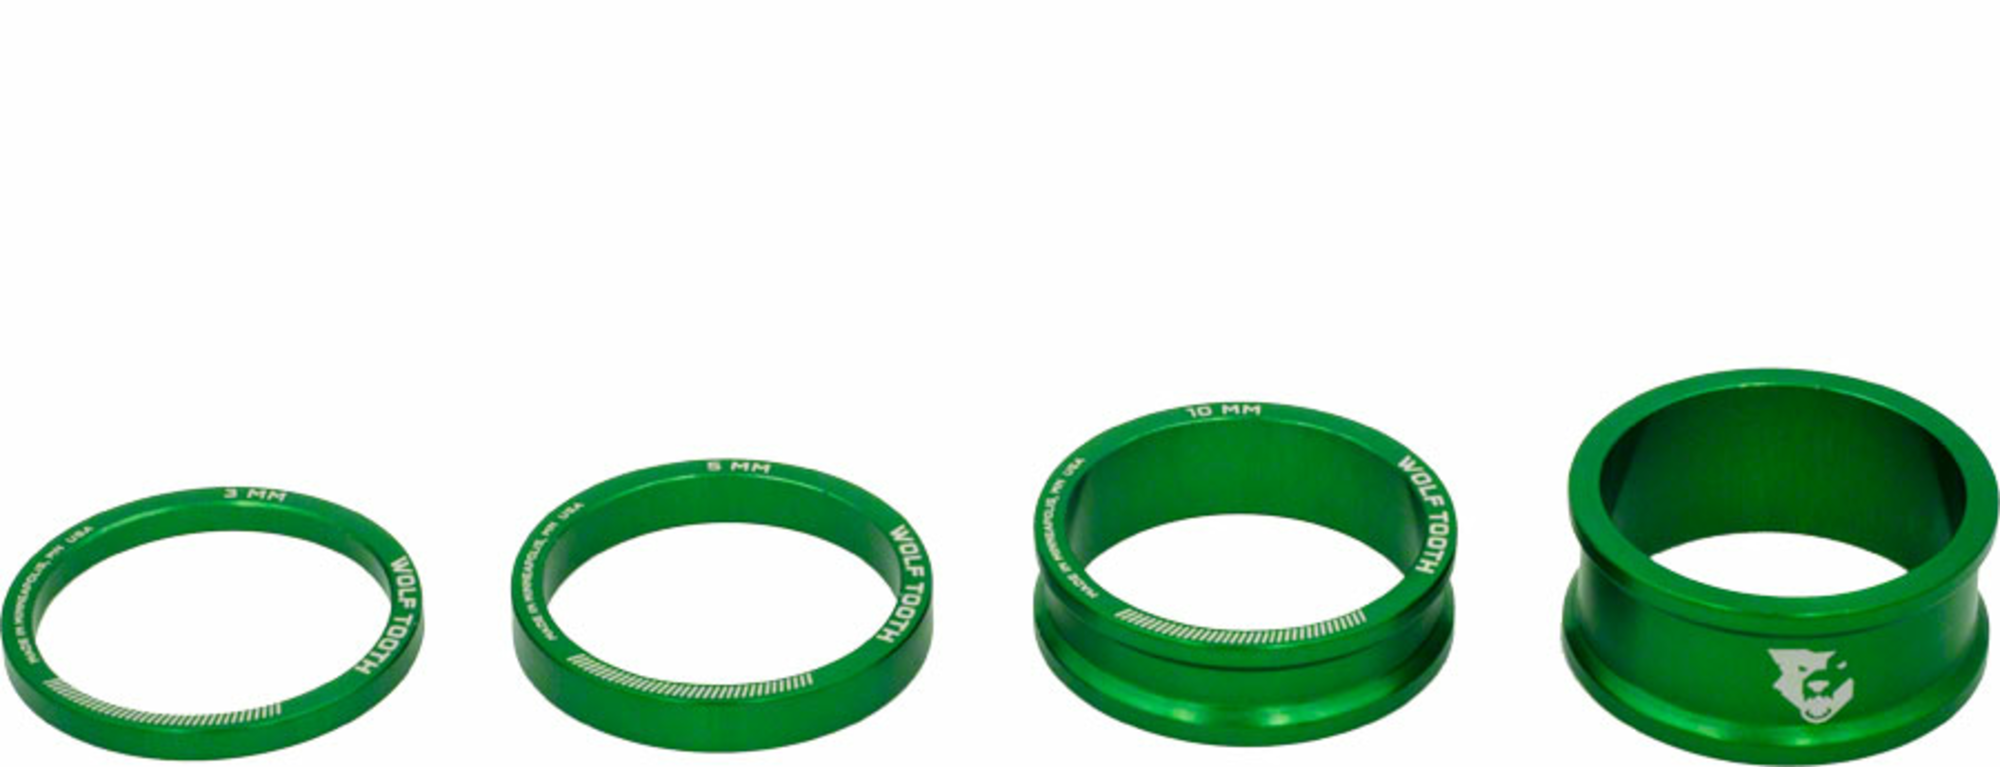 tidligere Samuel overbelastning Wolf Tooth Wolf Tooth Headset Spacer Kit 3, 5,10, 15mm, Green - Mello Velo  Bicycle Shop & Cafe